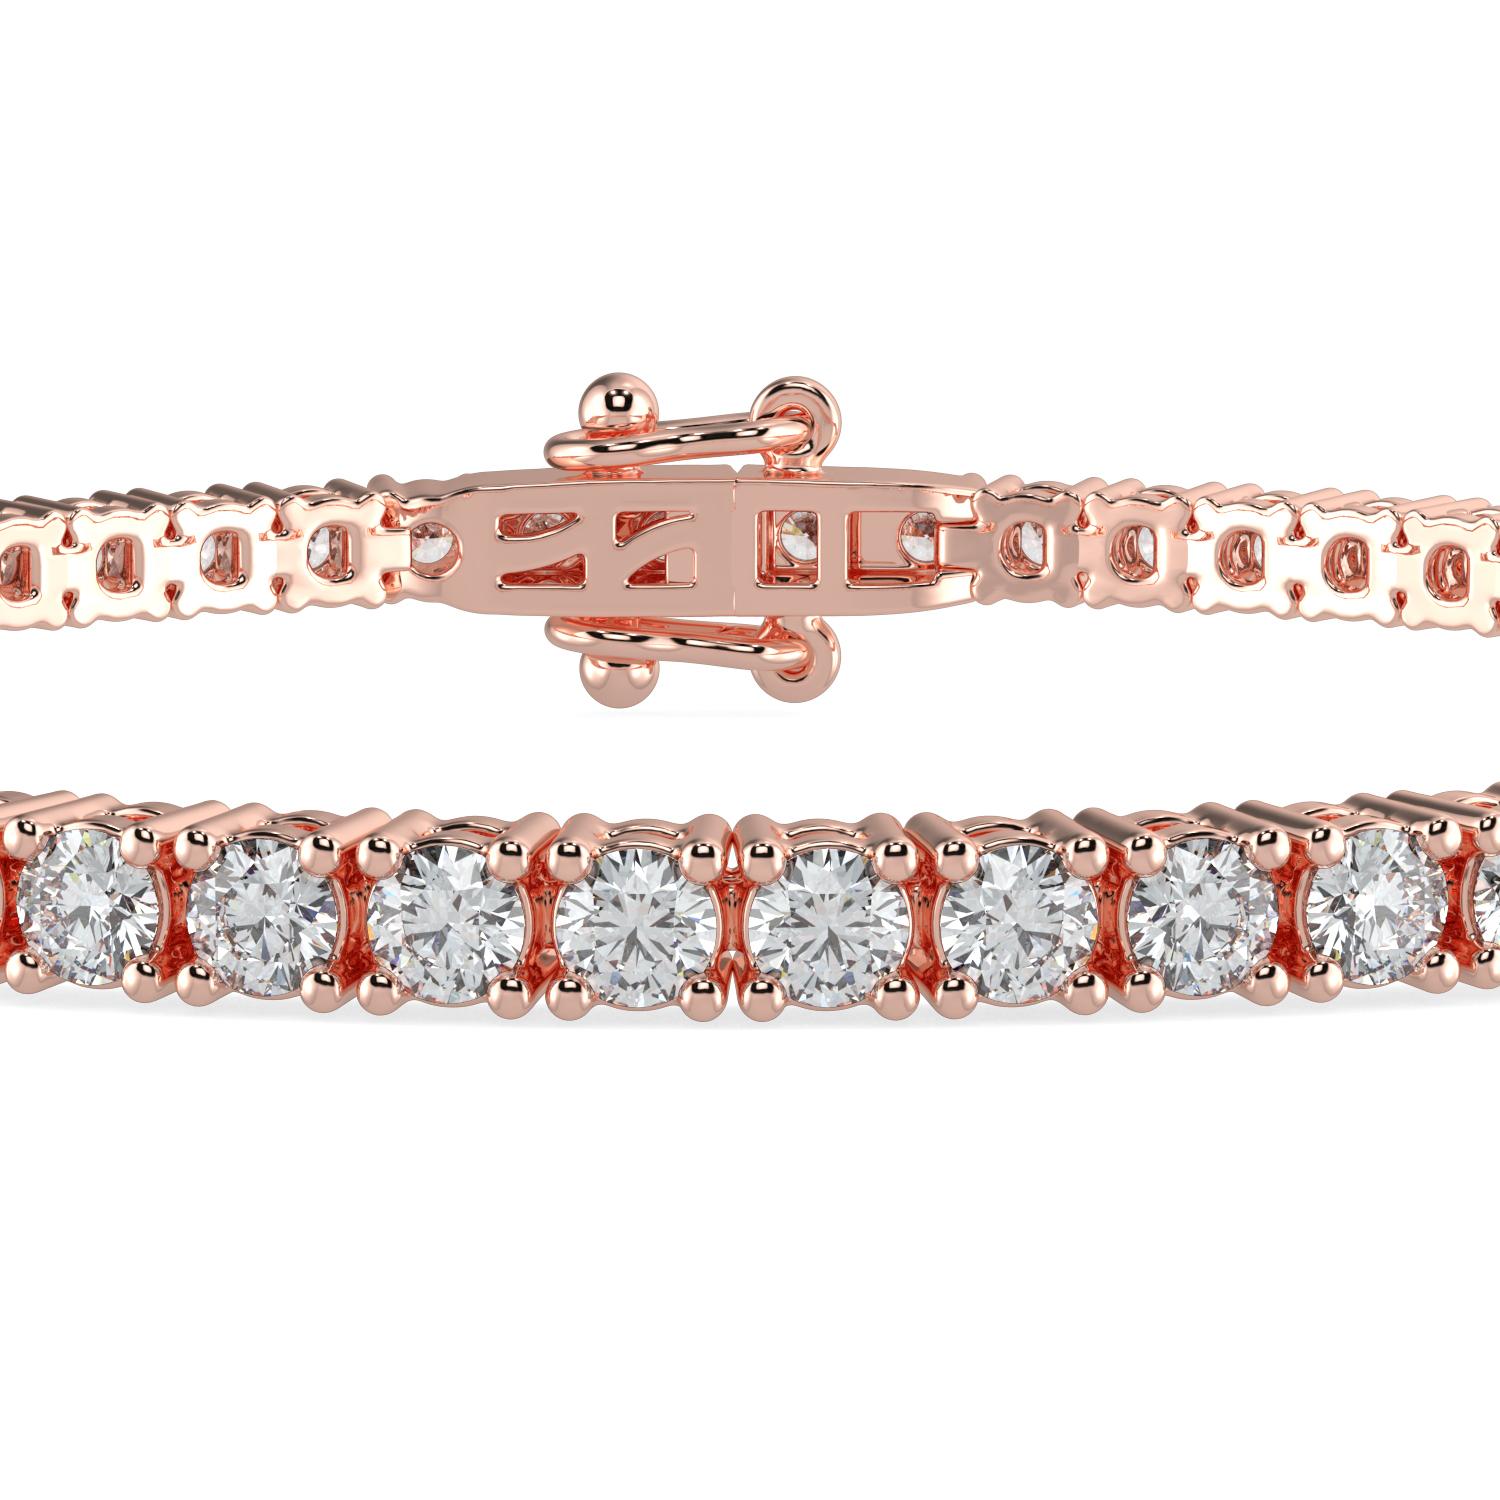 12.00 Carat Round Cut GH-SI Natural Diamond Classic Tennis Bracelet 4 Prong 14K Rose Gold for Women

Specification
Brand: AAMIAA
Length: 7 Inches 
Color: GH
Carat Weight:12.00CTW
Clarity: SI

LUXURIOUS AND LASTING- Our bracelets are a luxurious and